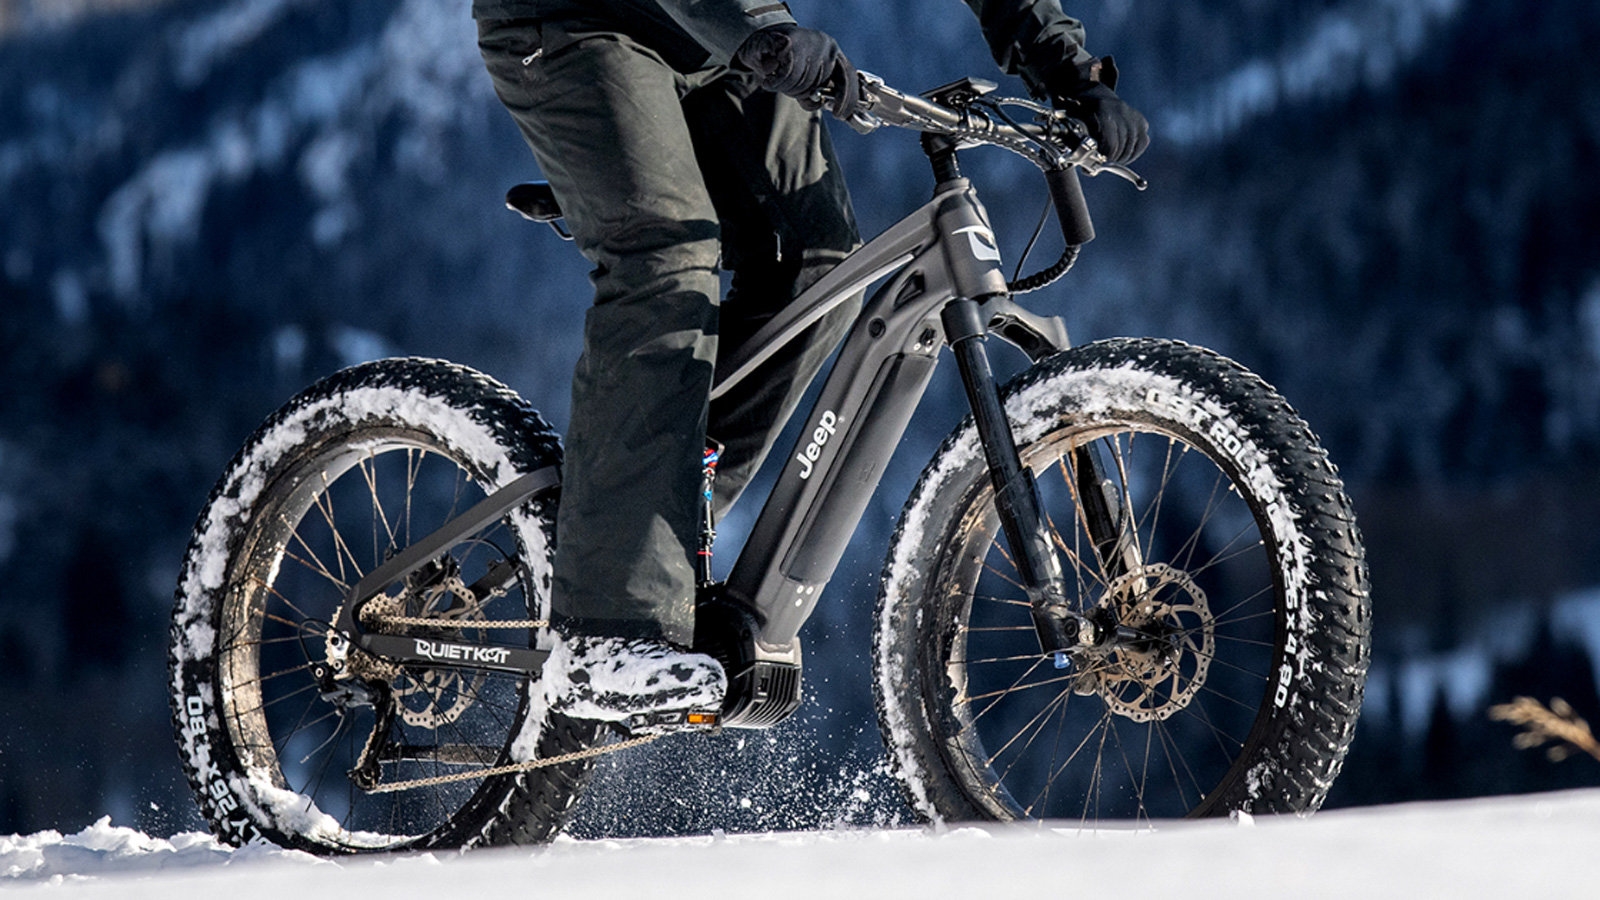 Jeep's Super Bowl ad teases a powerful off-road electric bicycle | DeviceDaily.com